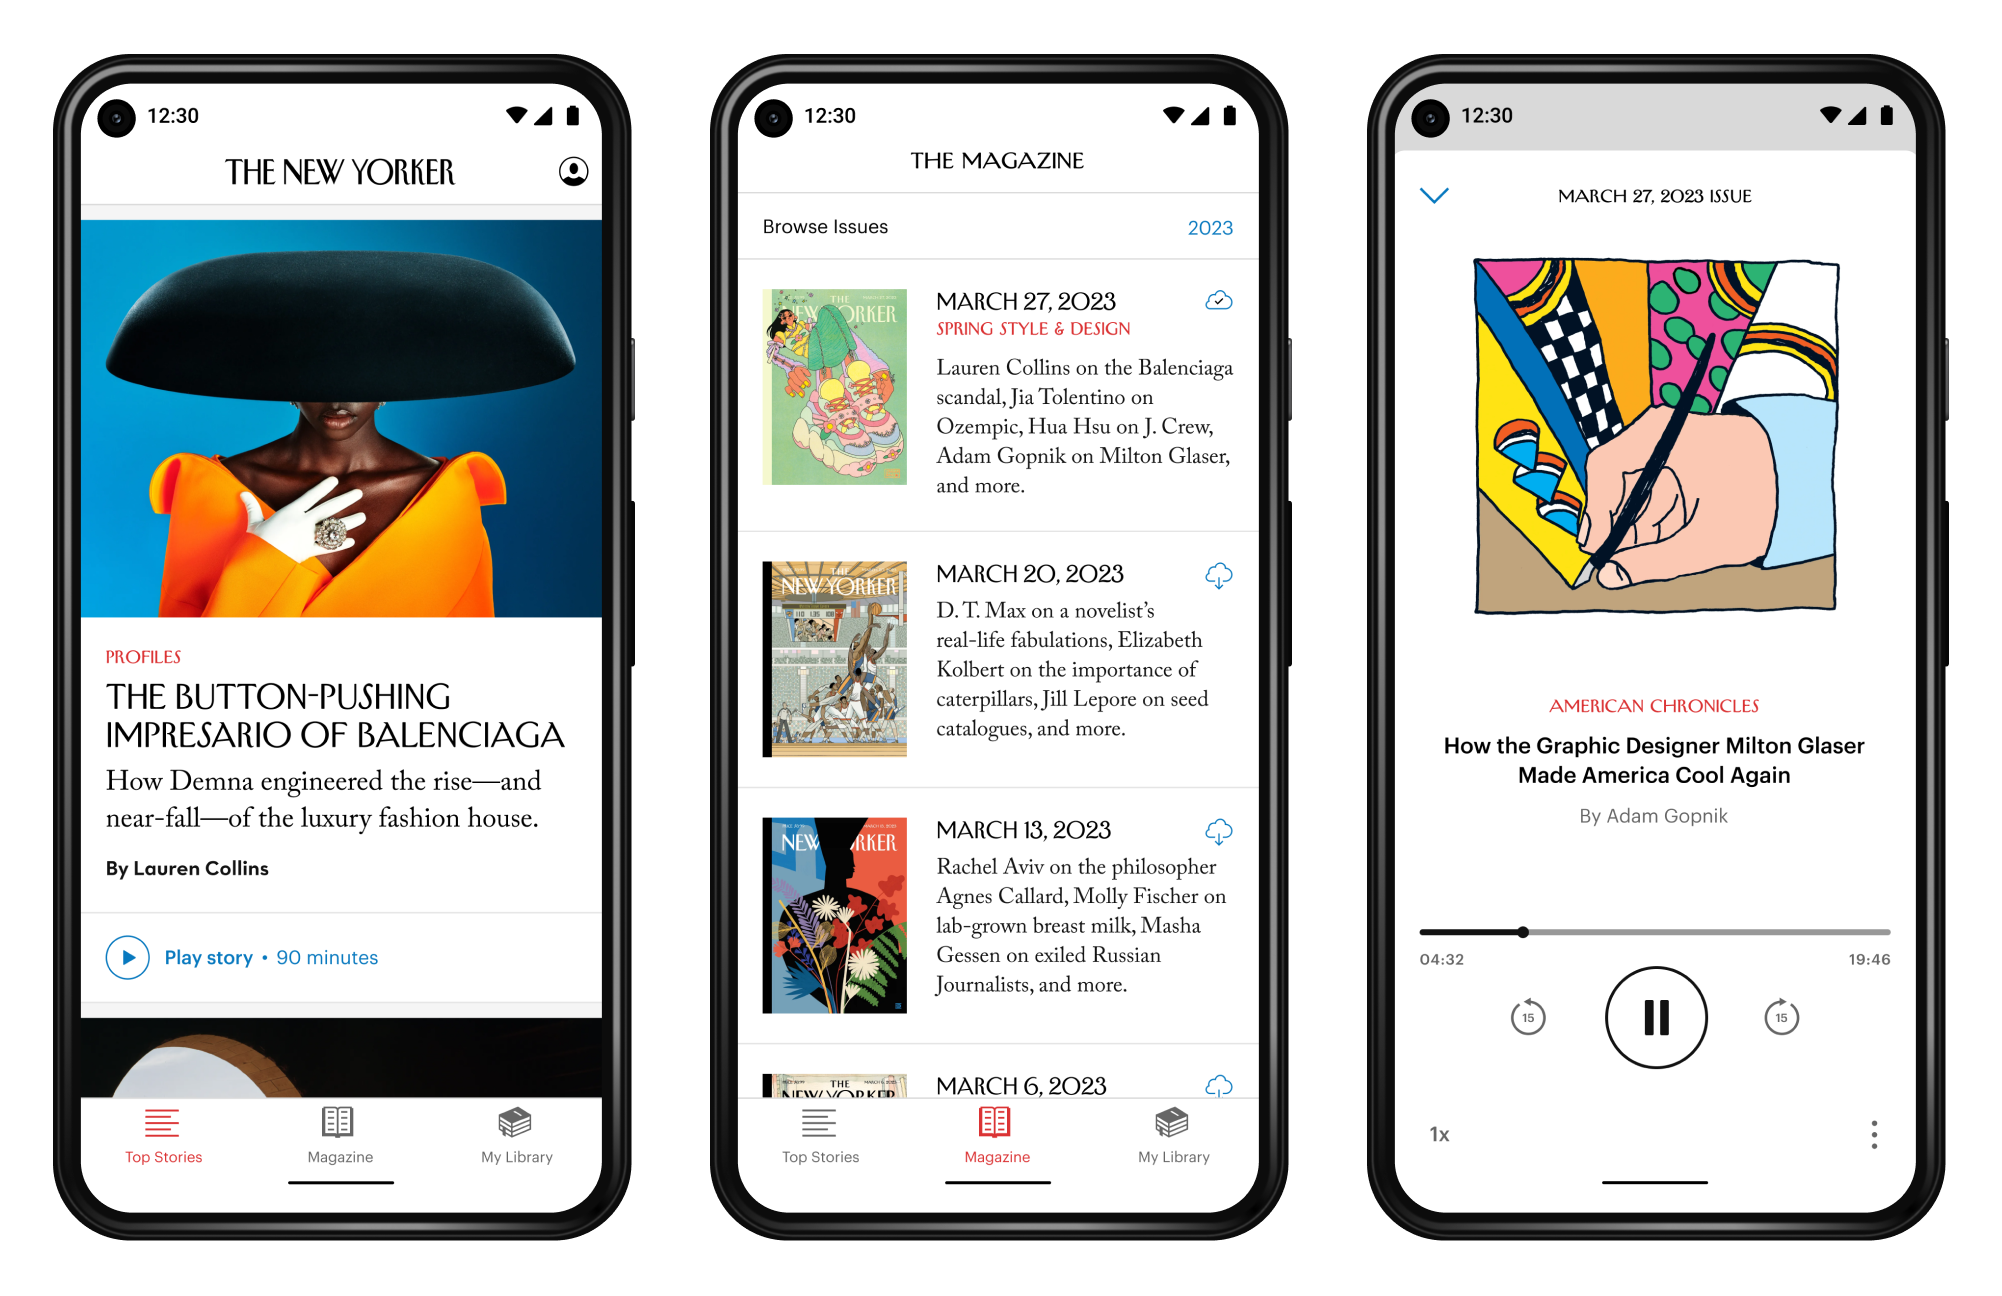 Screenshots of an app for reading articles from The New Yorker